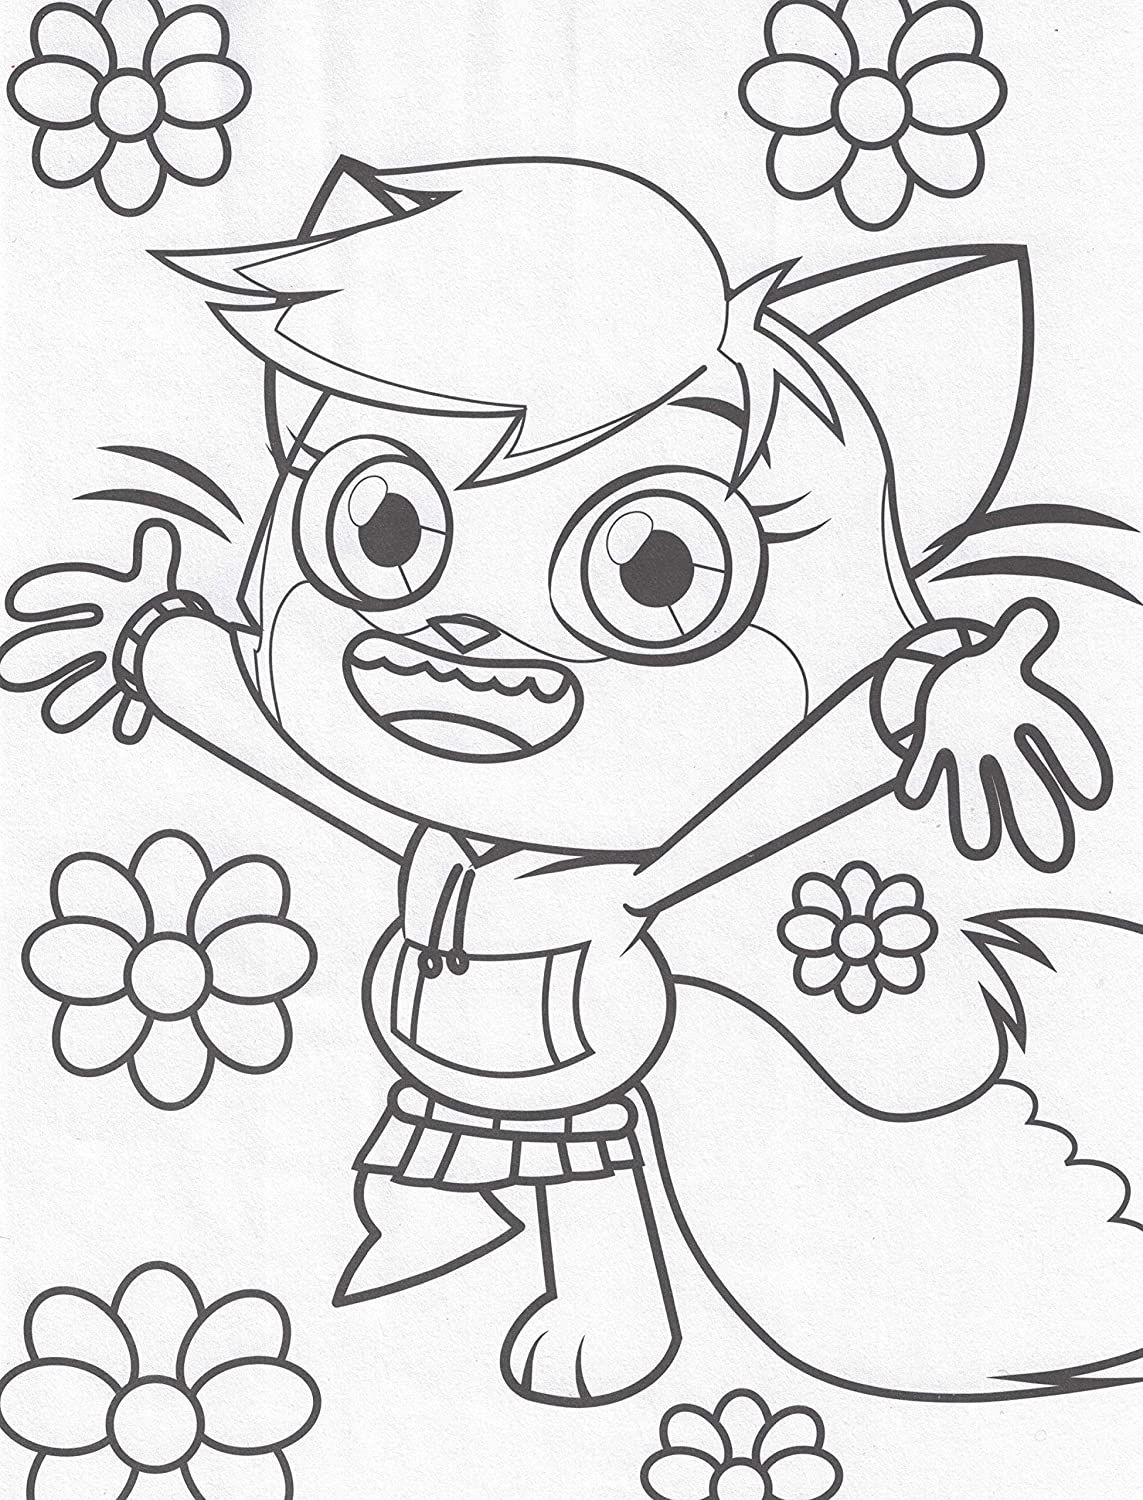 Ryan's World Coloring Pages To Print - Feedthefightbos